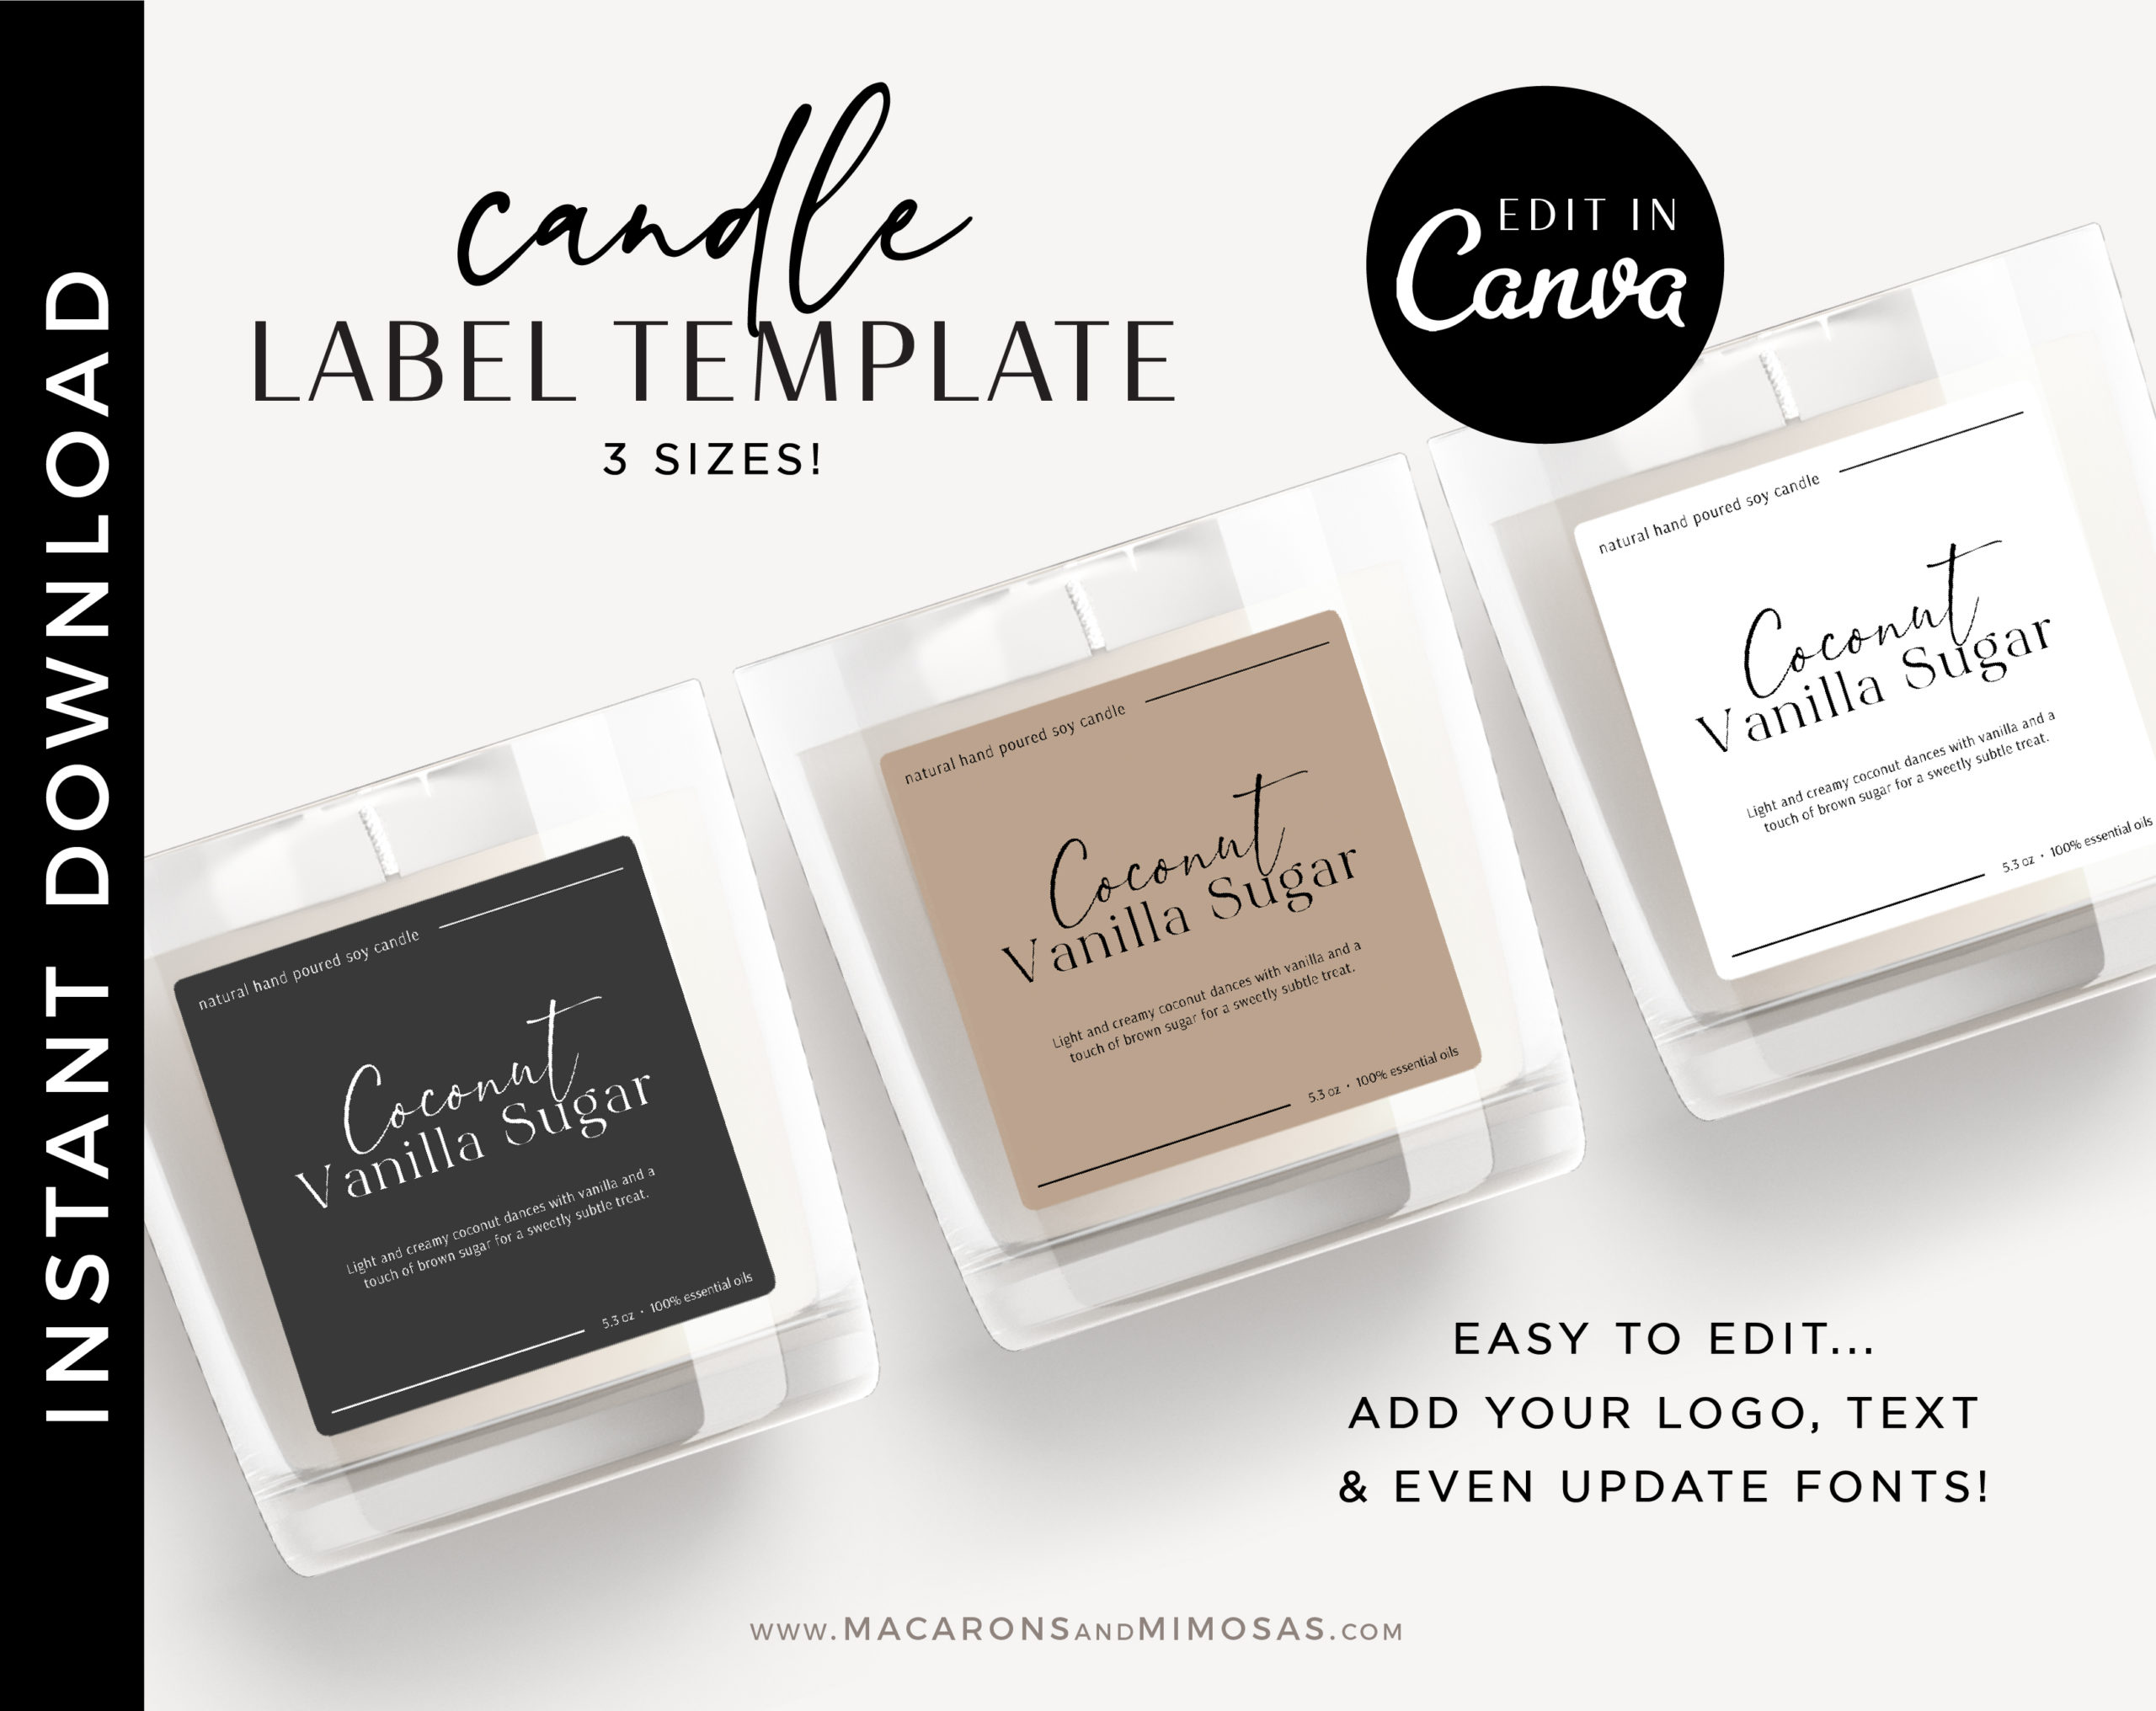 Editable Candle Label Template • Macarons and Mimosas